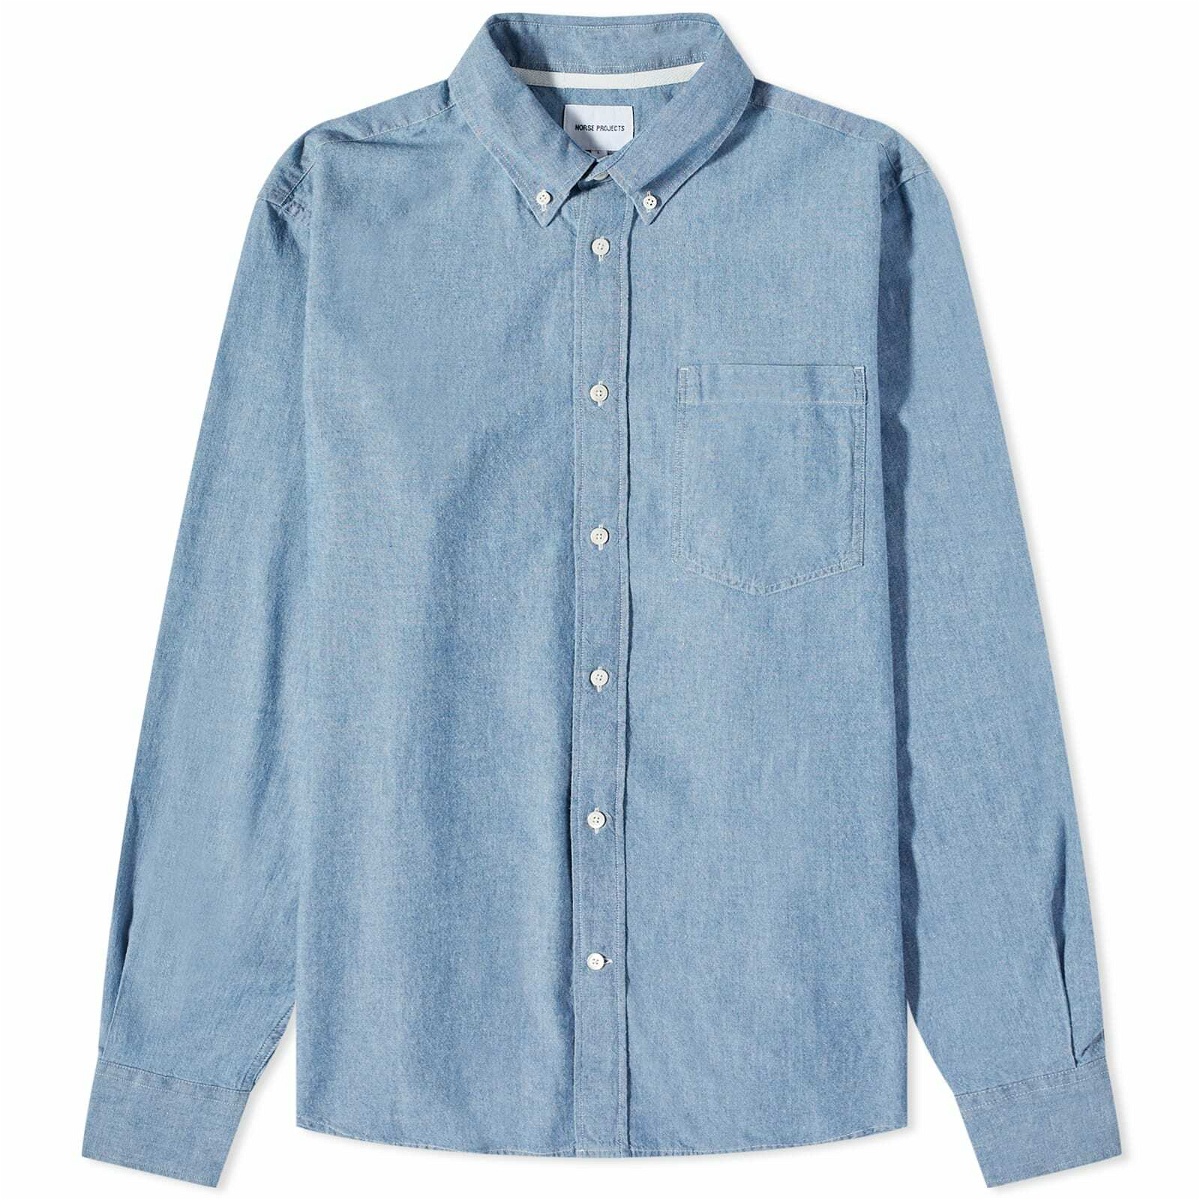 Norse Projects Men's Algot Chambray Shirt in Indigo Norse Projects